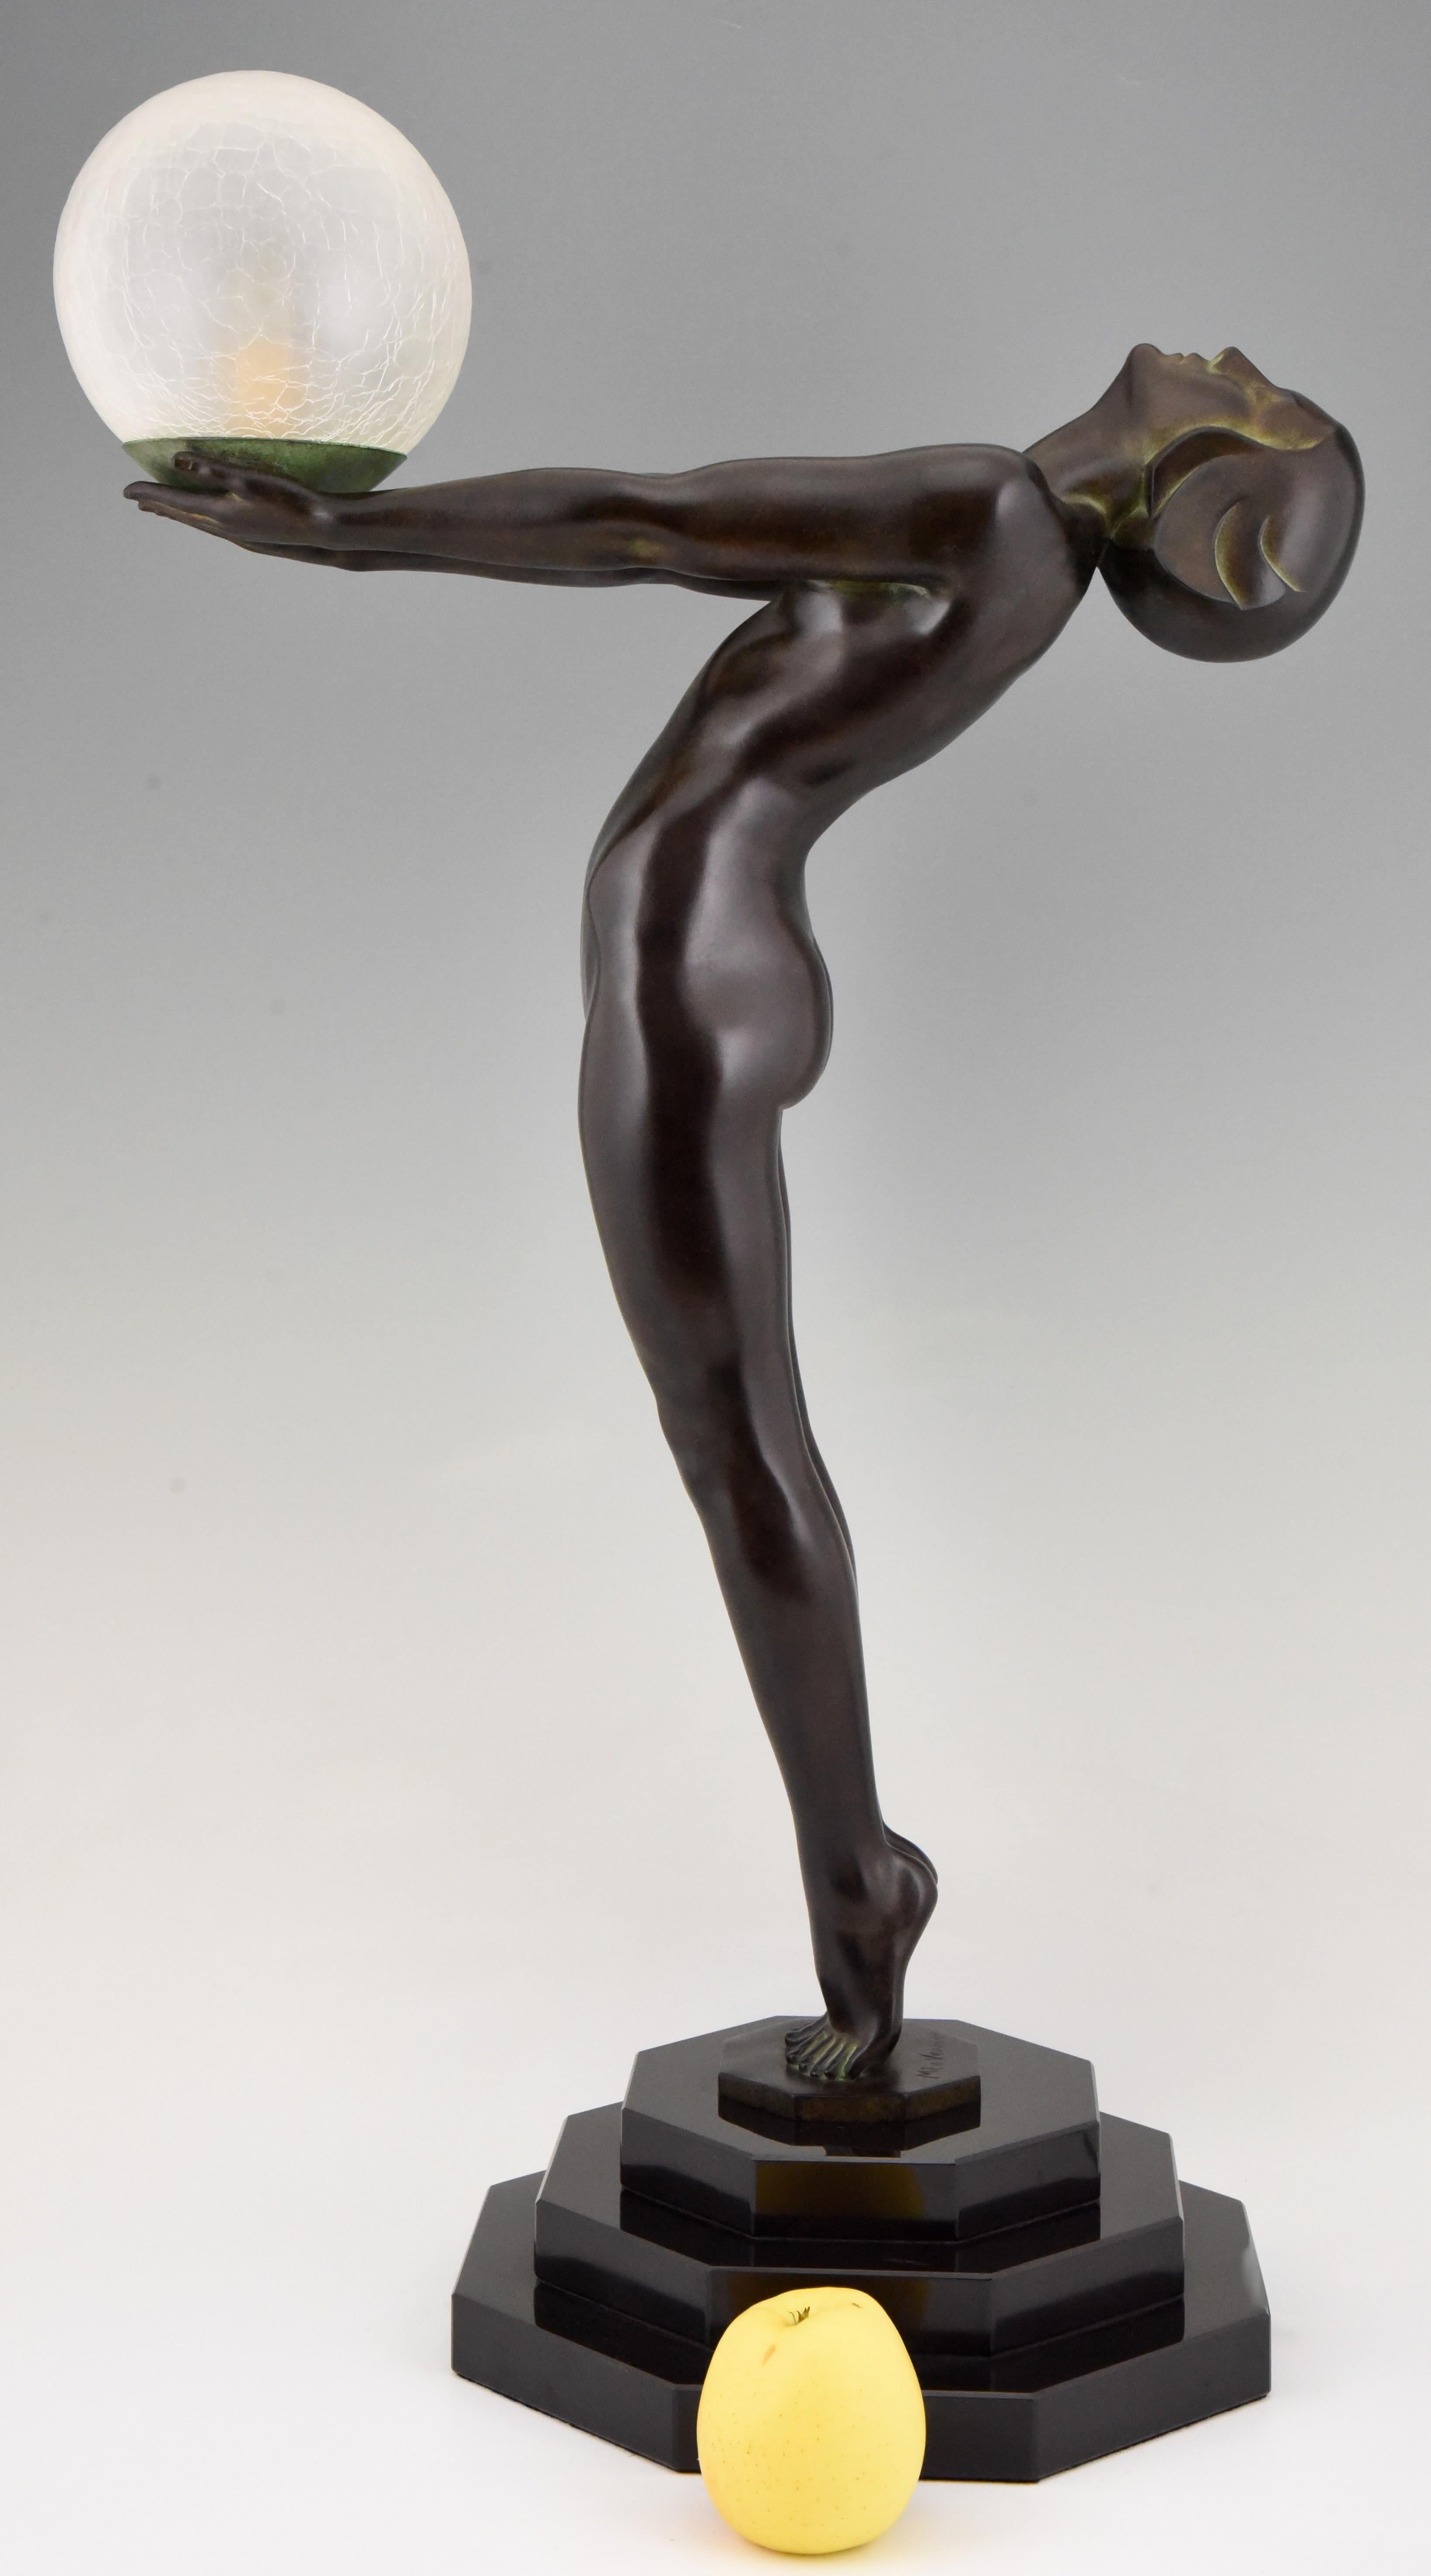 Clarté, iconic 84 cm / 33 inch tall Art Deco style figural table lamp of a standing nude holding a glass shade by Max Le Verrier with foundry mark.
Designed in 1928.
Posthumous contemporary cast at the Max Le Verrier foundry in Paris.
Handcrafted.